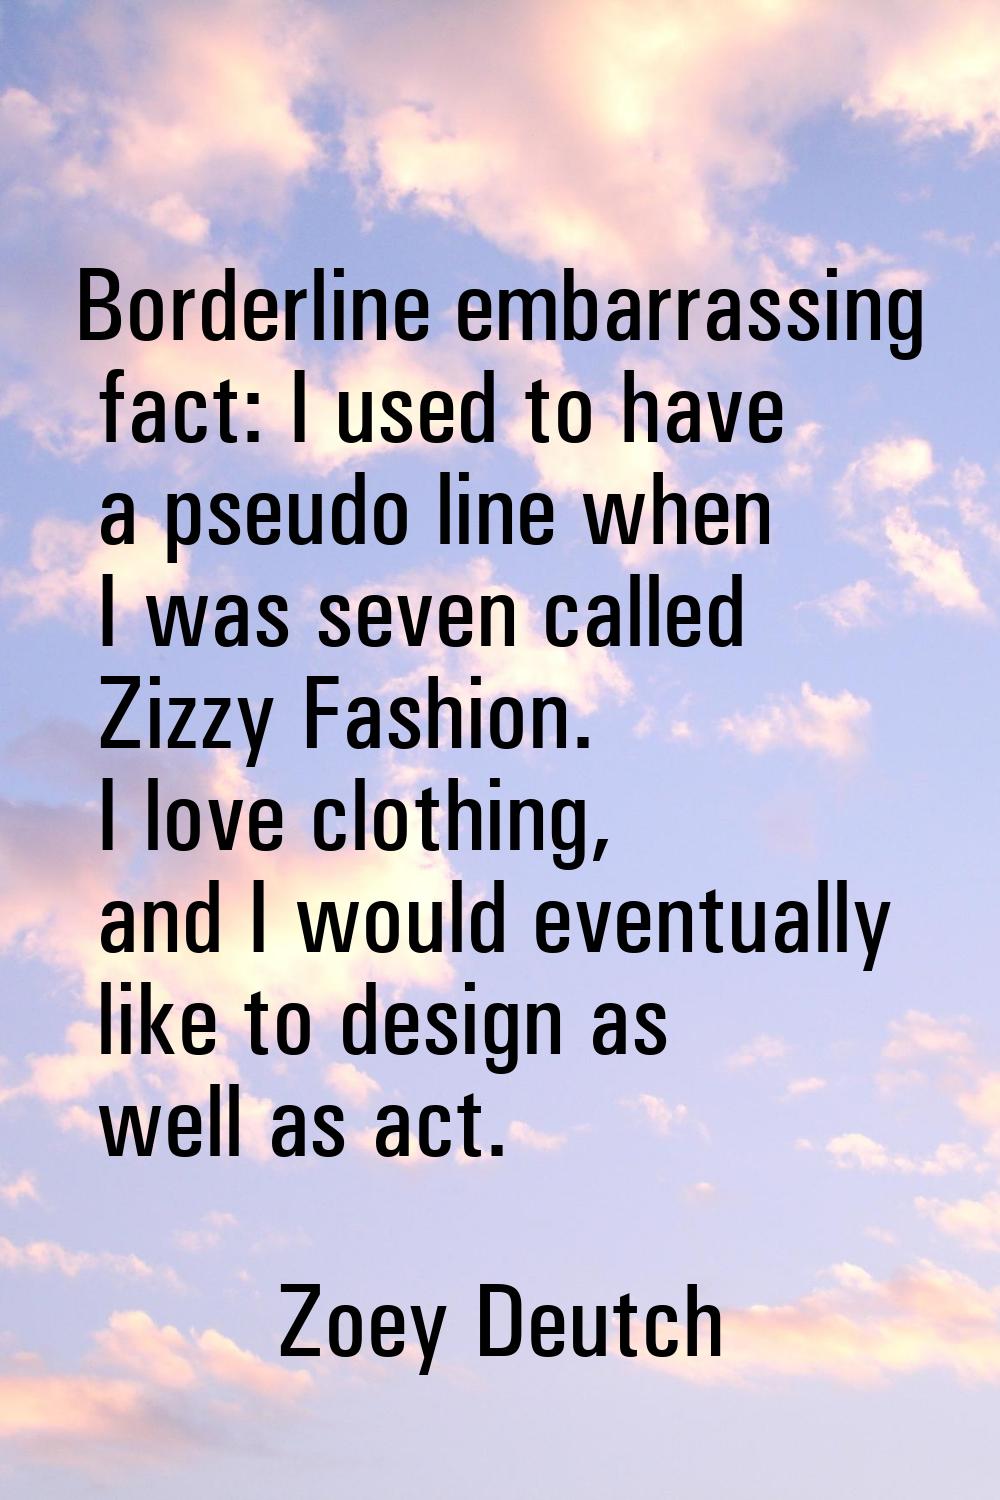 Borderline embarrassing fact: I used to have a pseudo line when I was seven called Zizzy Fashion. I